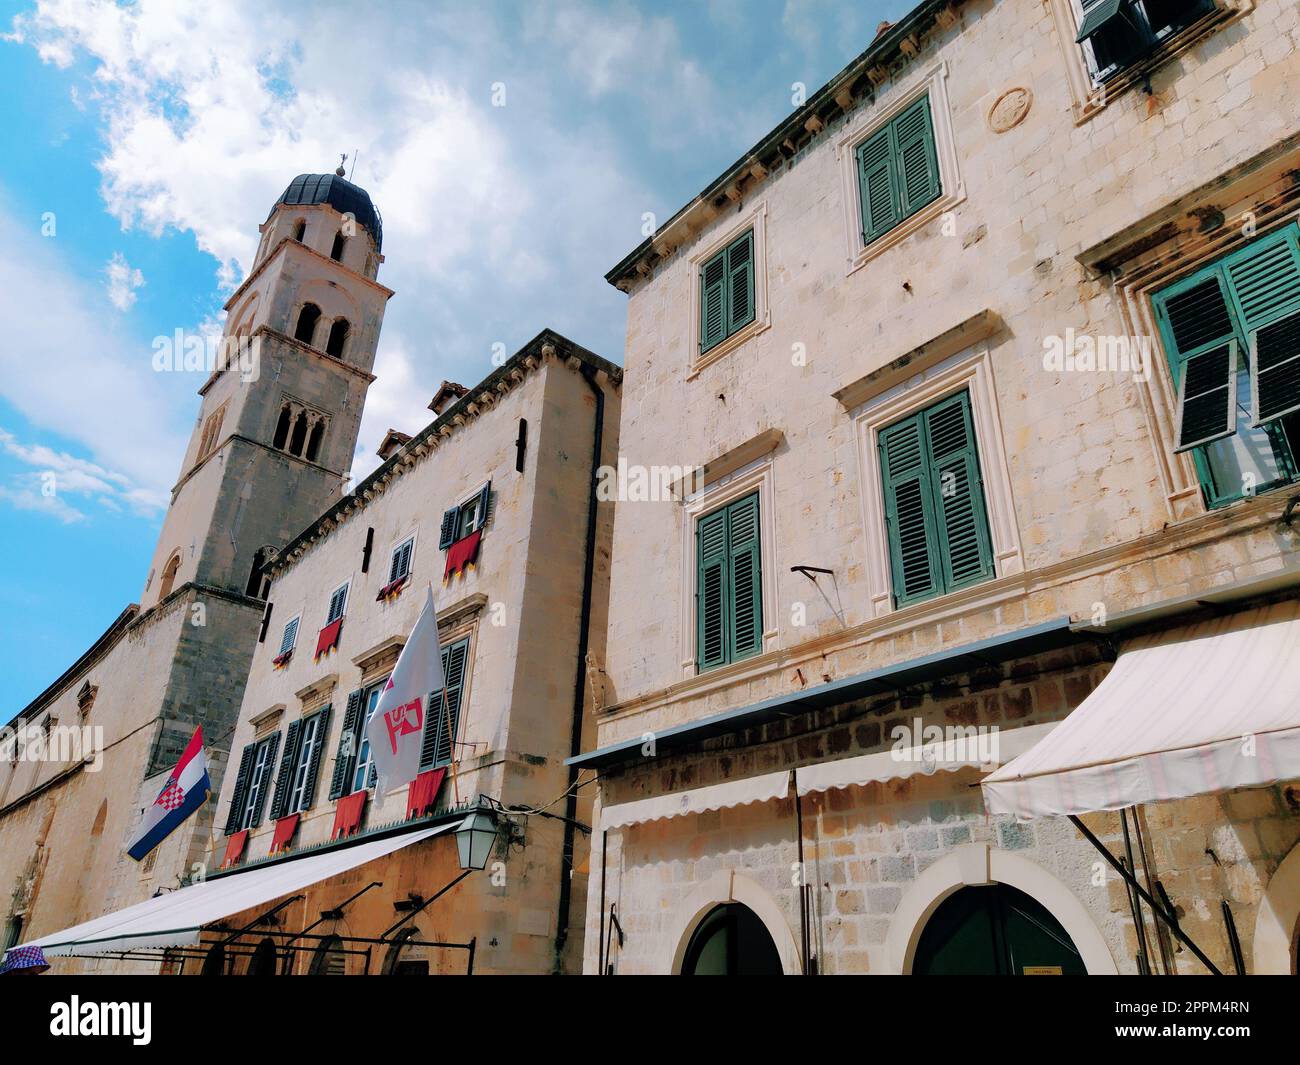 Stradun, Stradone is the main street of the historic city center of Dubrovnik in Croatia. architectural sights. A popular place for tourist walks. August 14, 2022 Tower and facades of ancient houses. Stock Photo